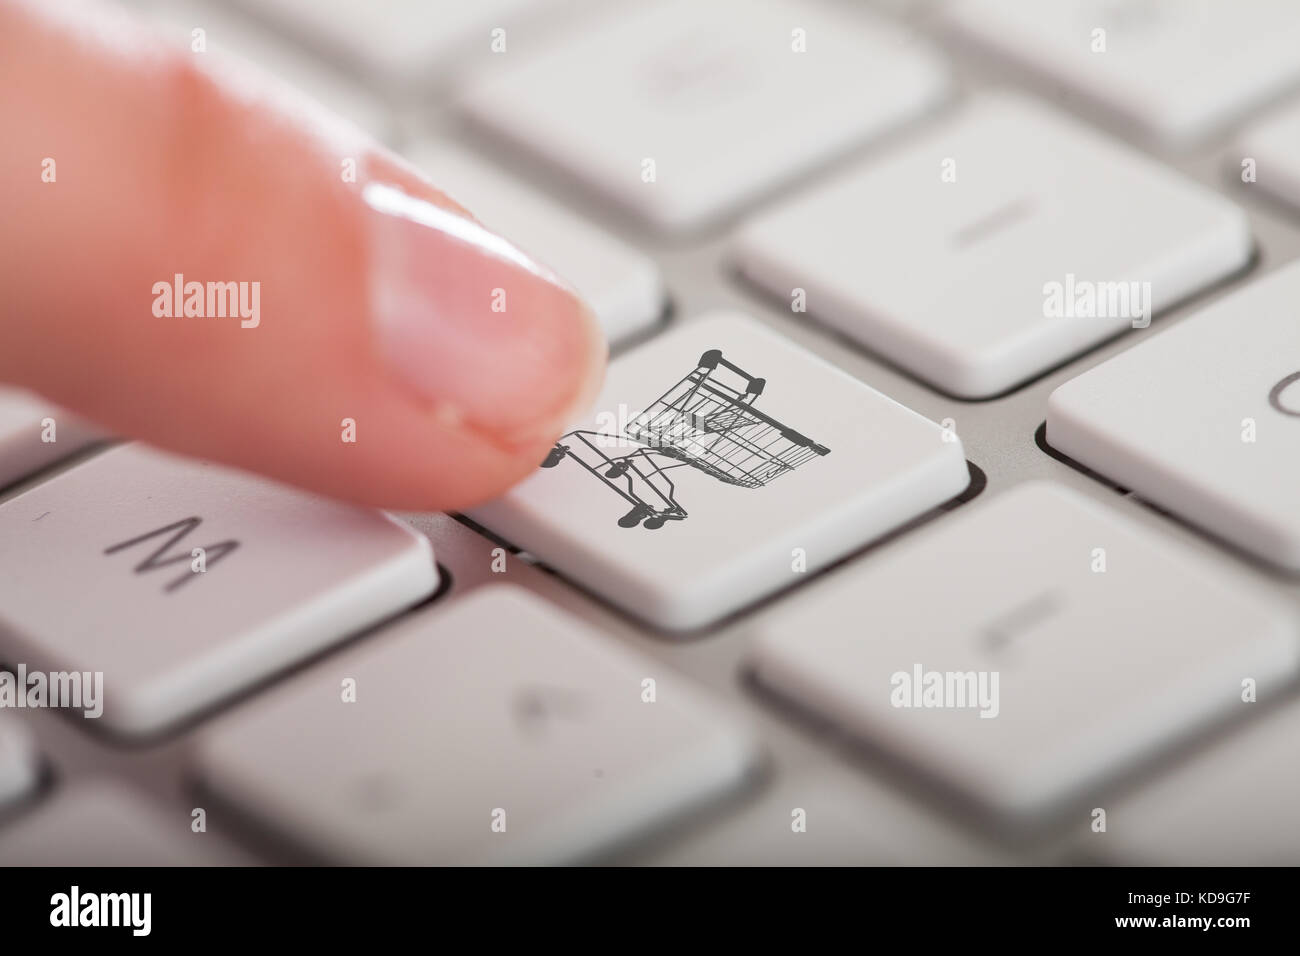 Close-up Photo Of Hands Pressing Buy Button Keyboard Stock Photo